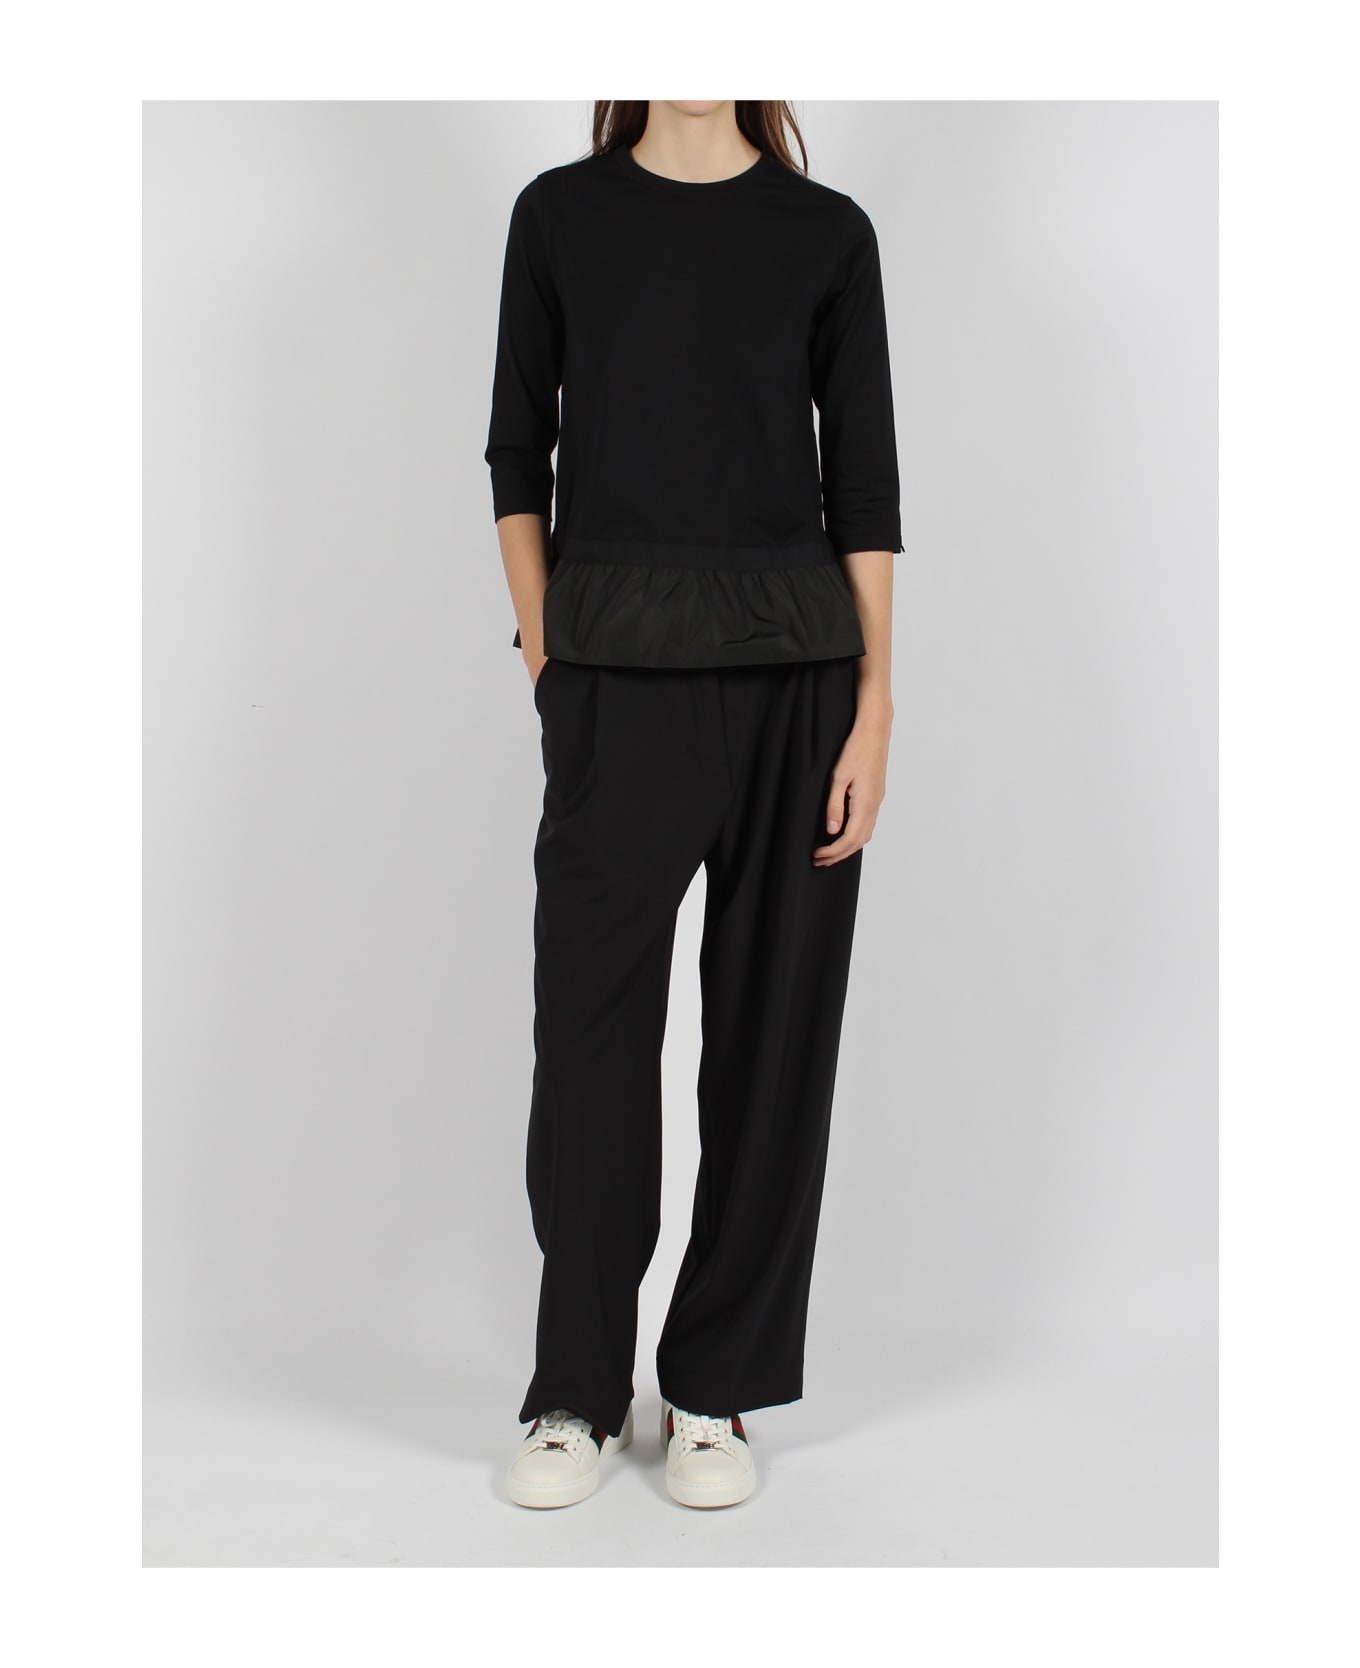 Herno Structures Nylon Trousers - Black